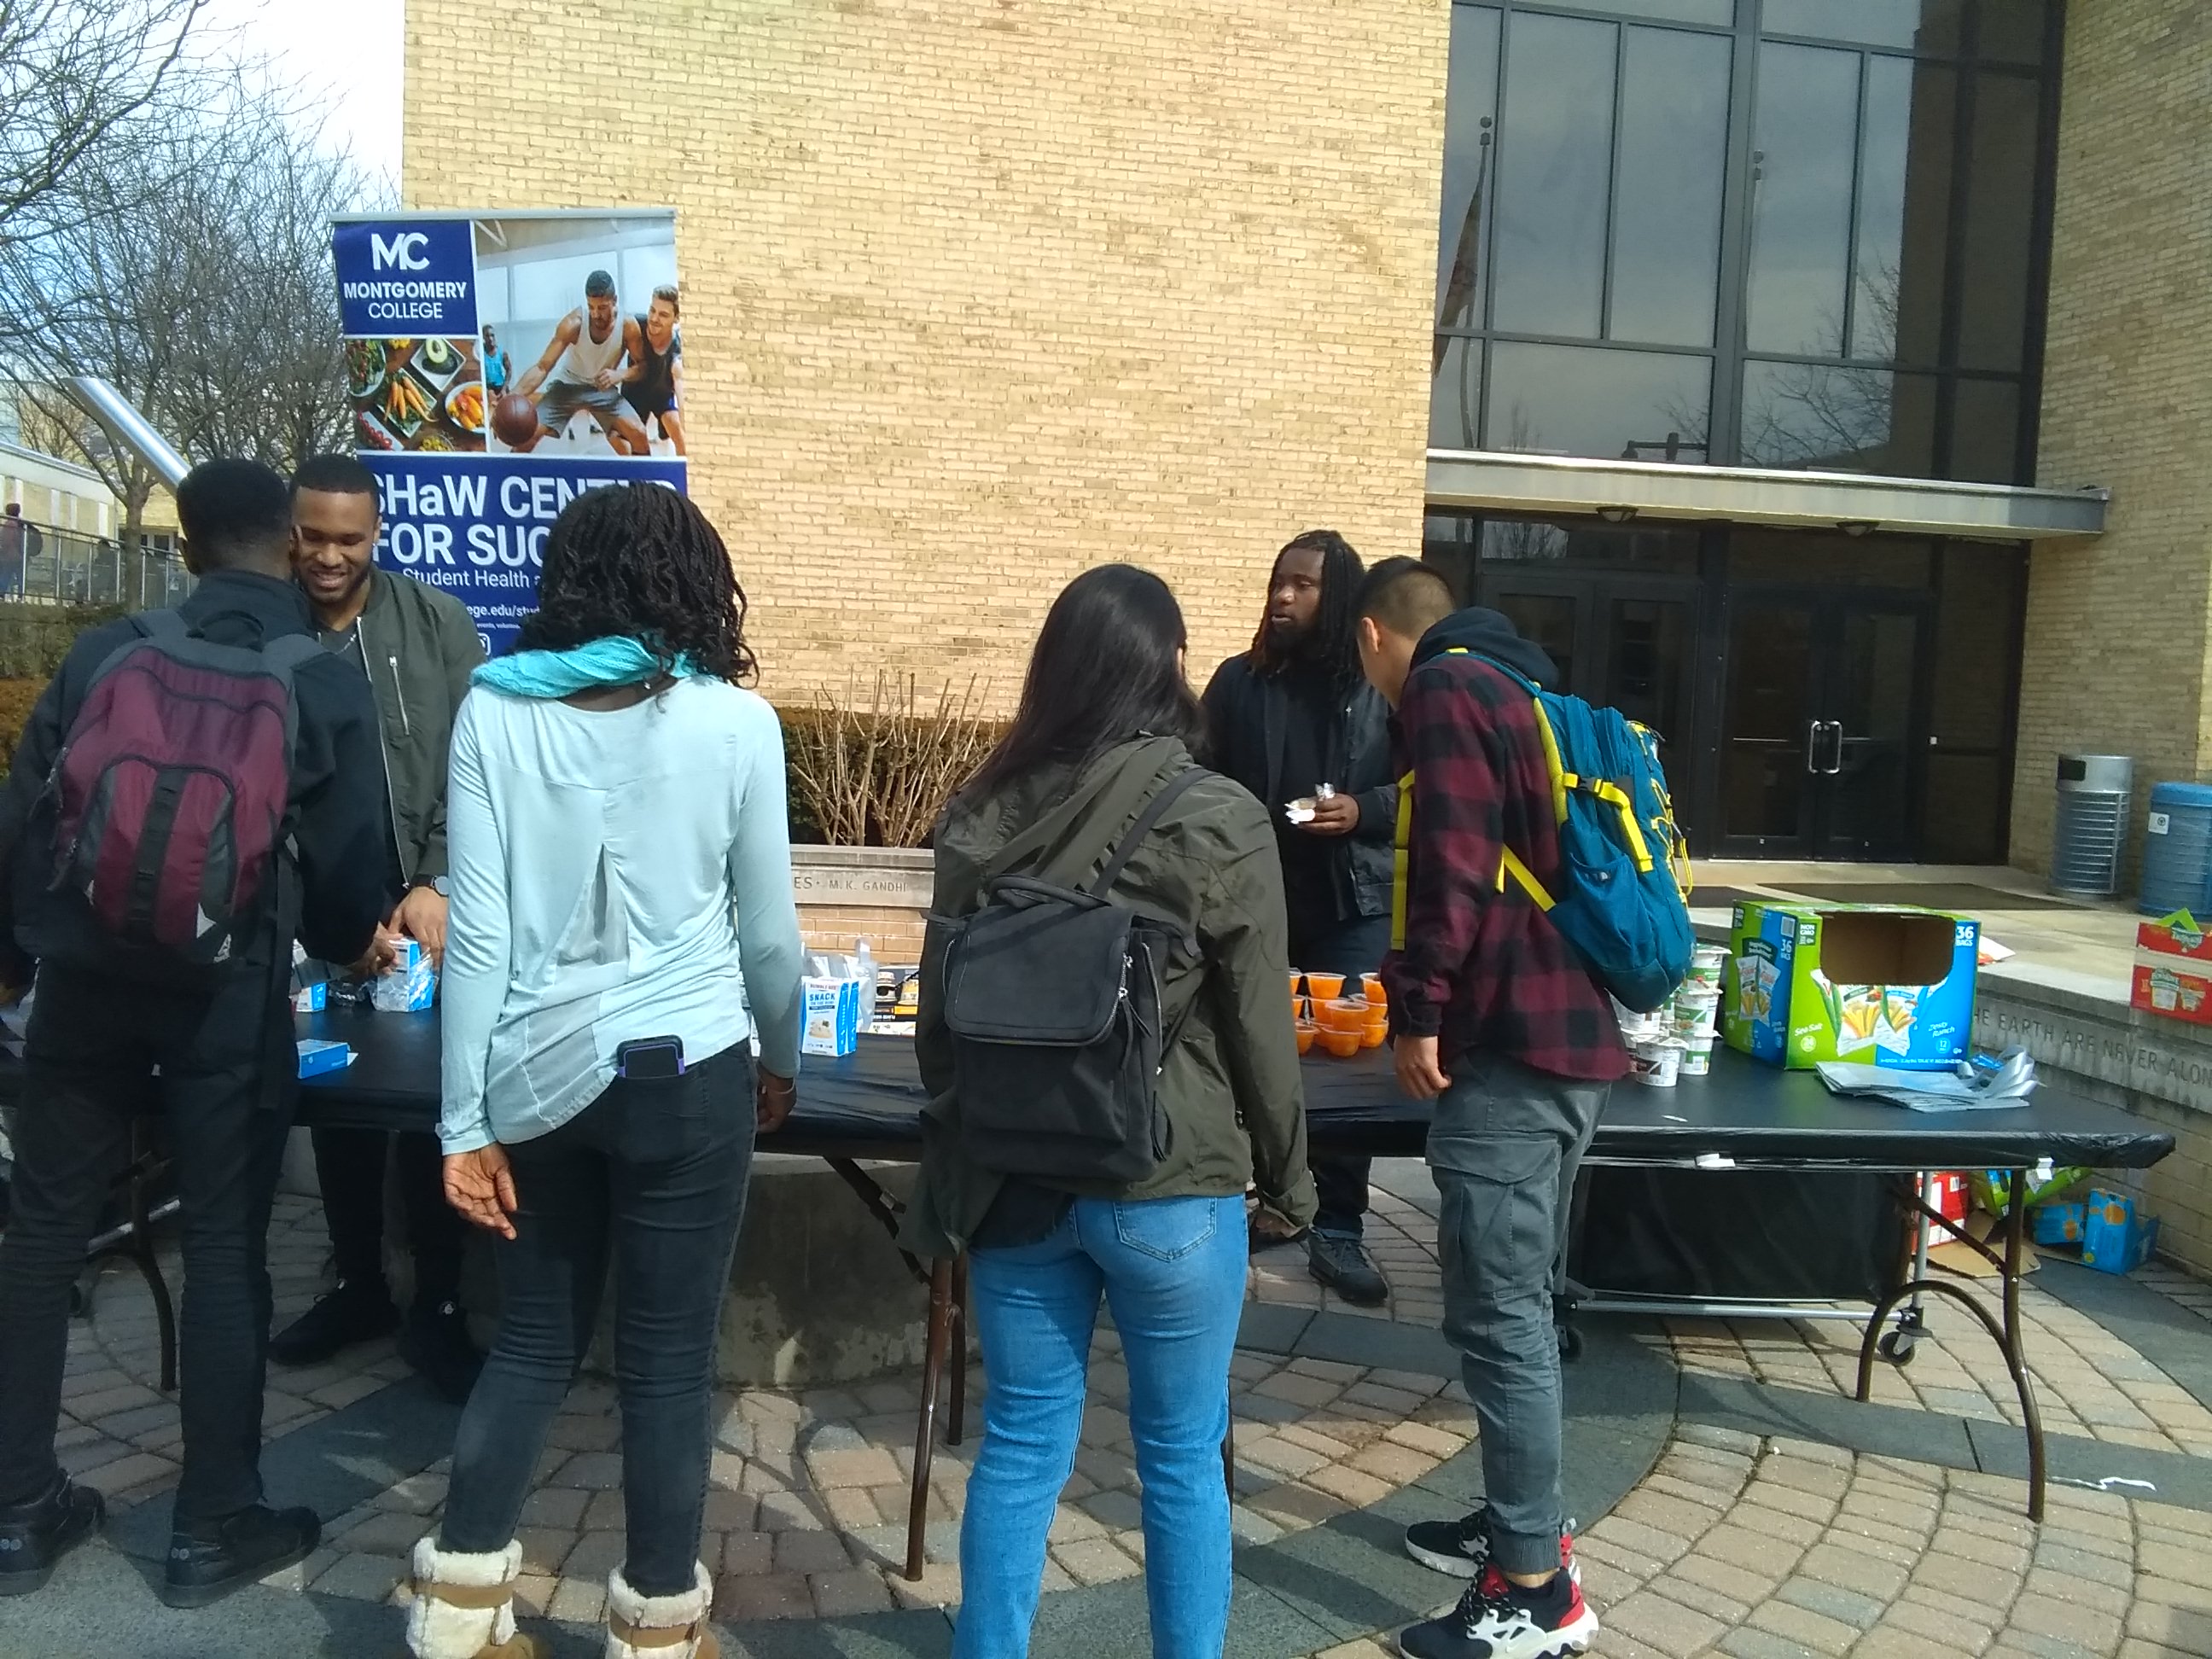 SHaW Center for Success Student Health and Wellness event